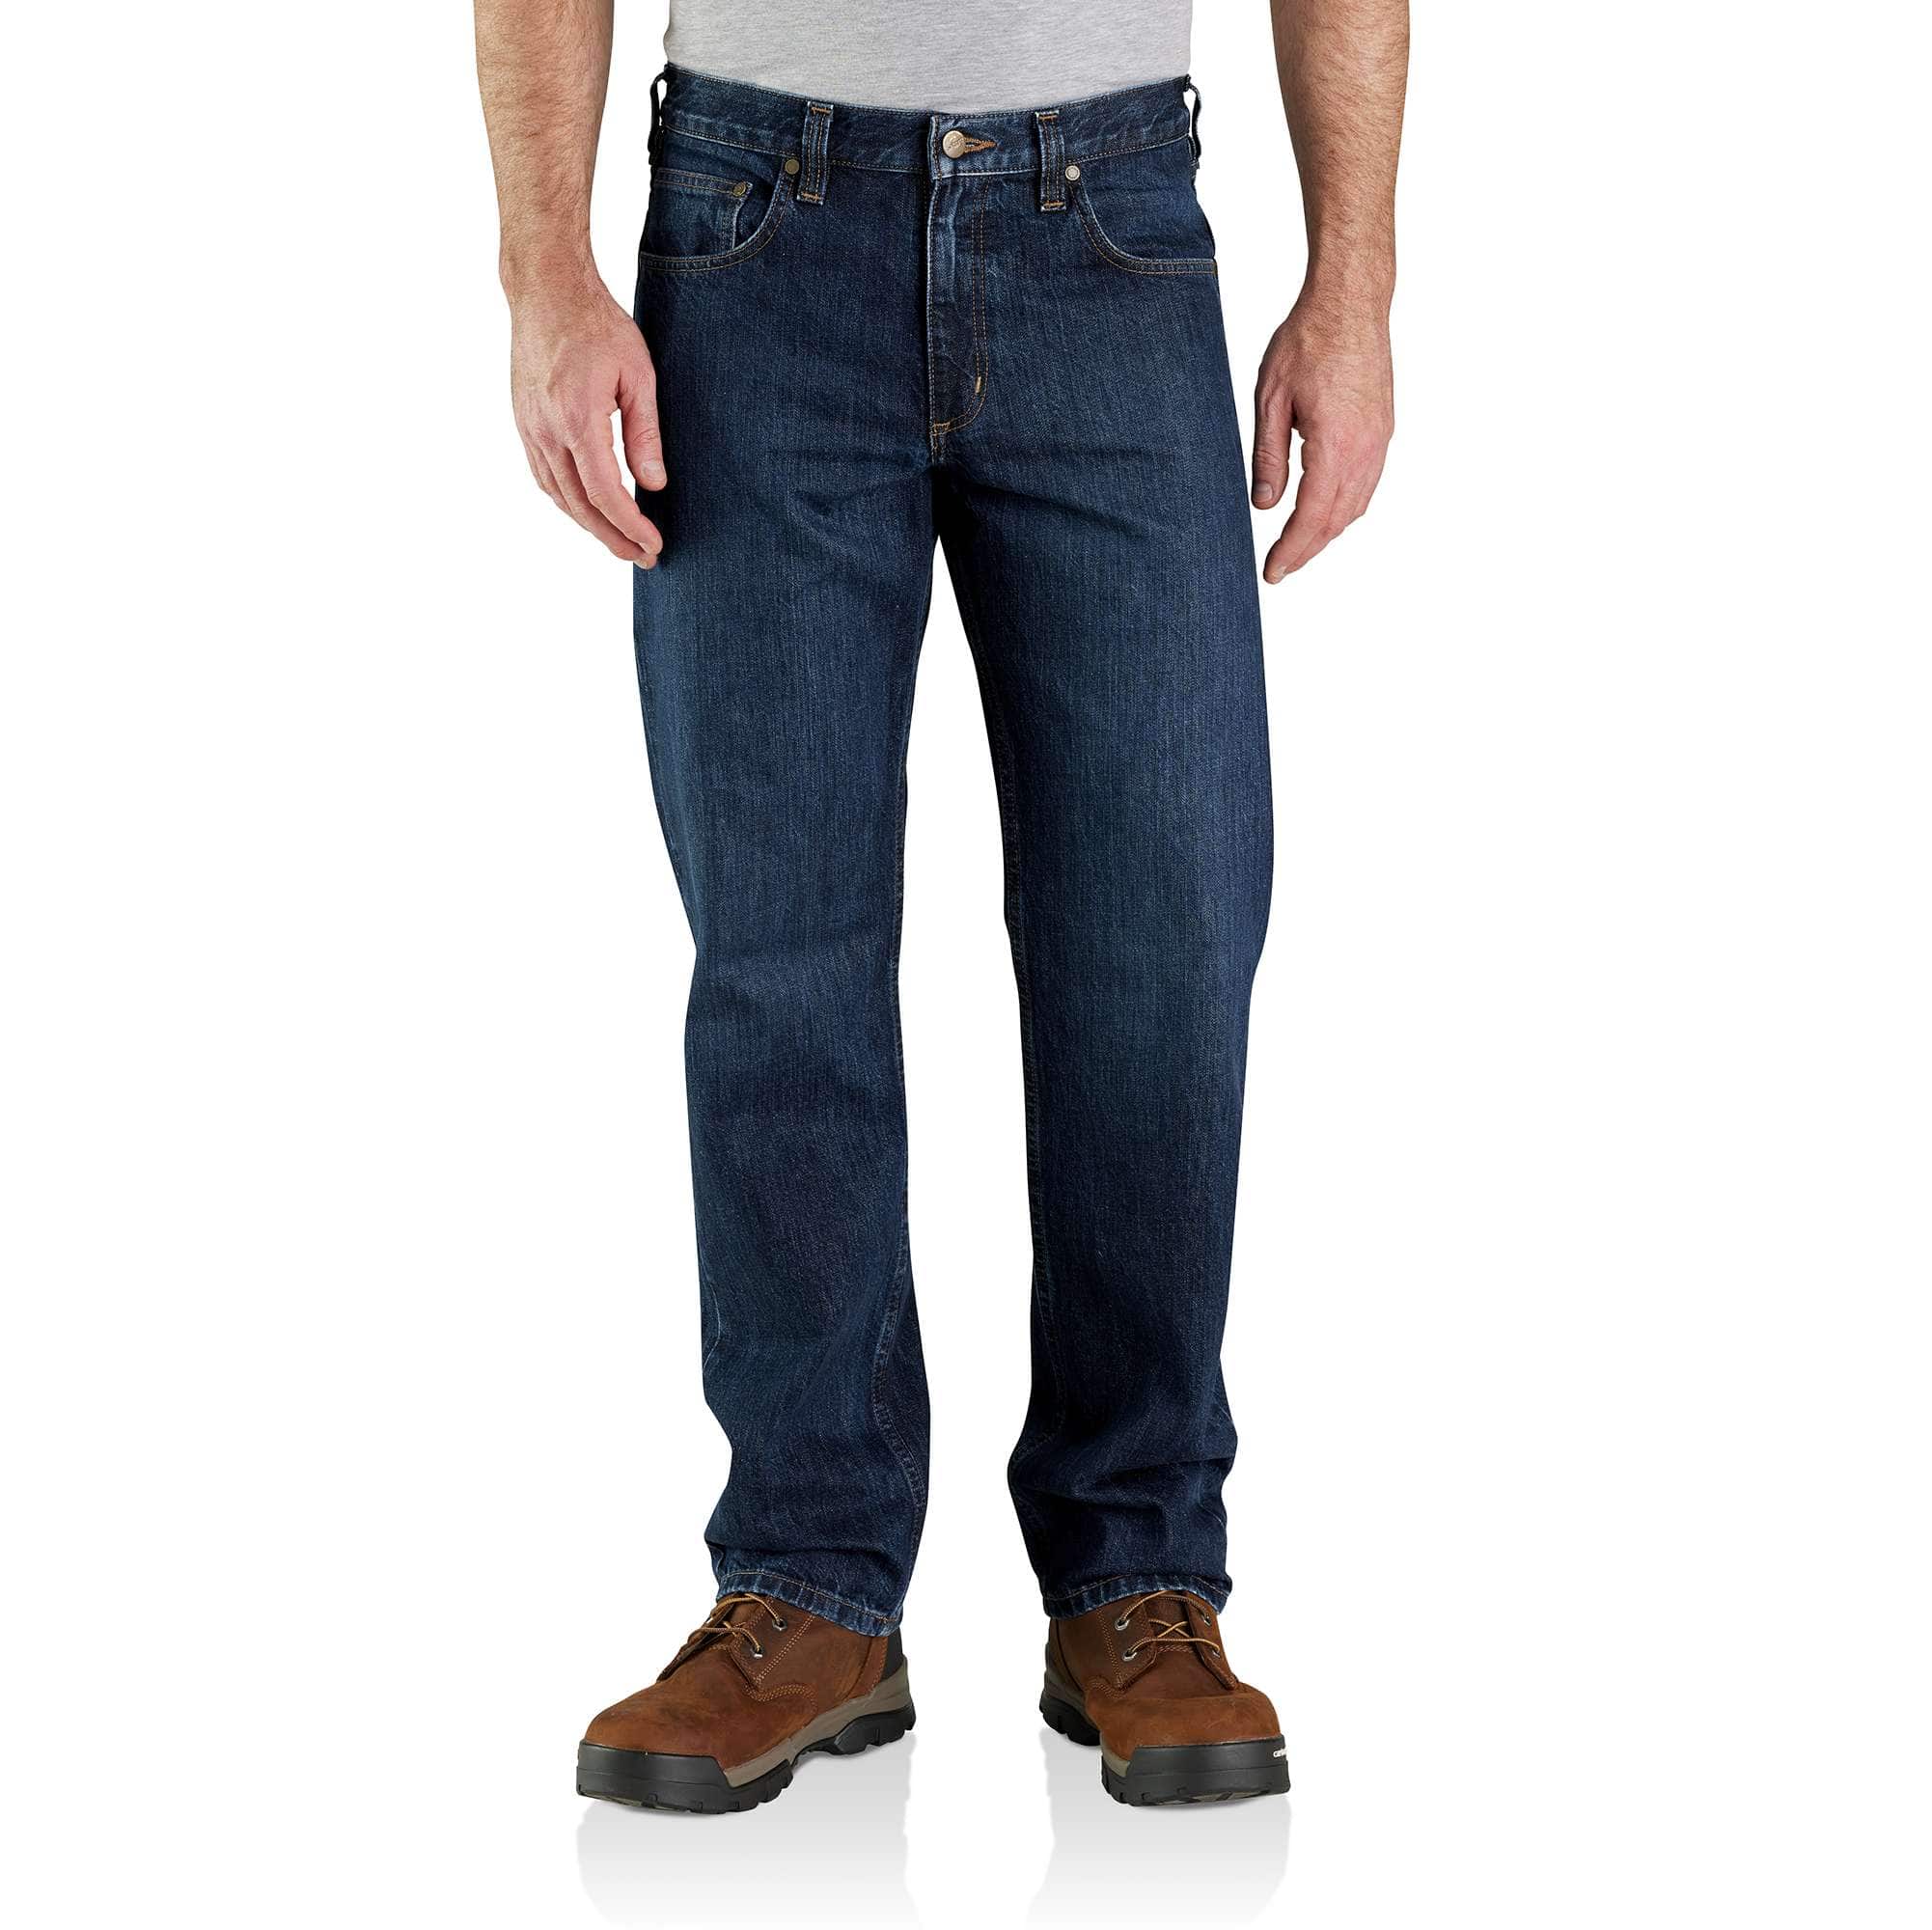 Men's Jean - Relaxed Fit - 100% Cotton Denim | Father's Day Gifts 